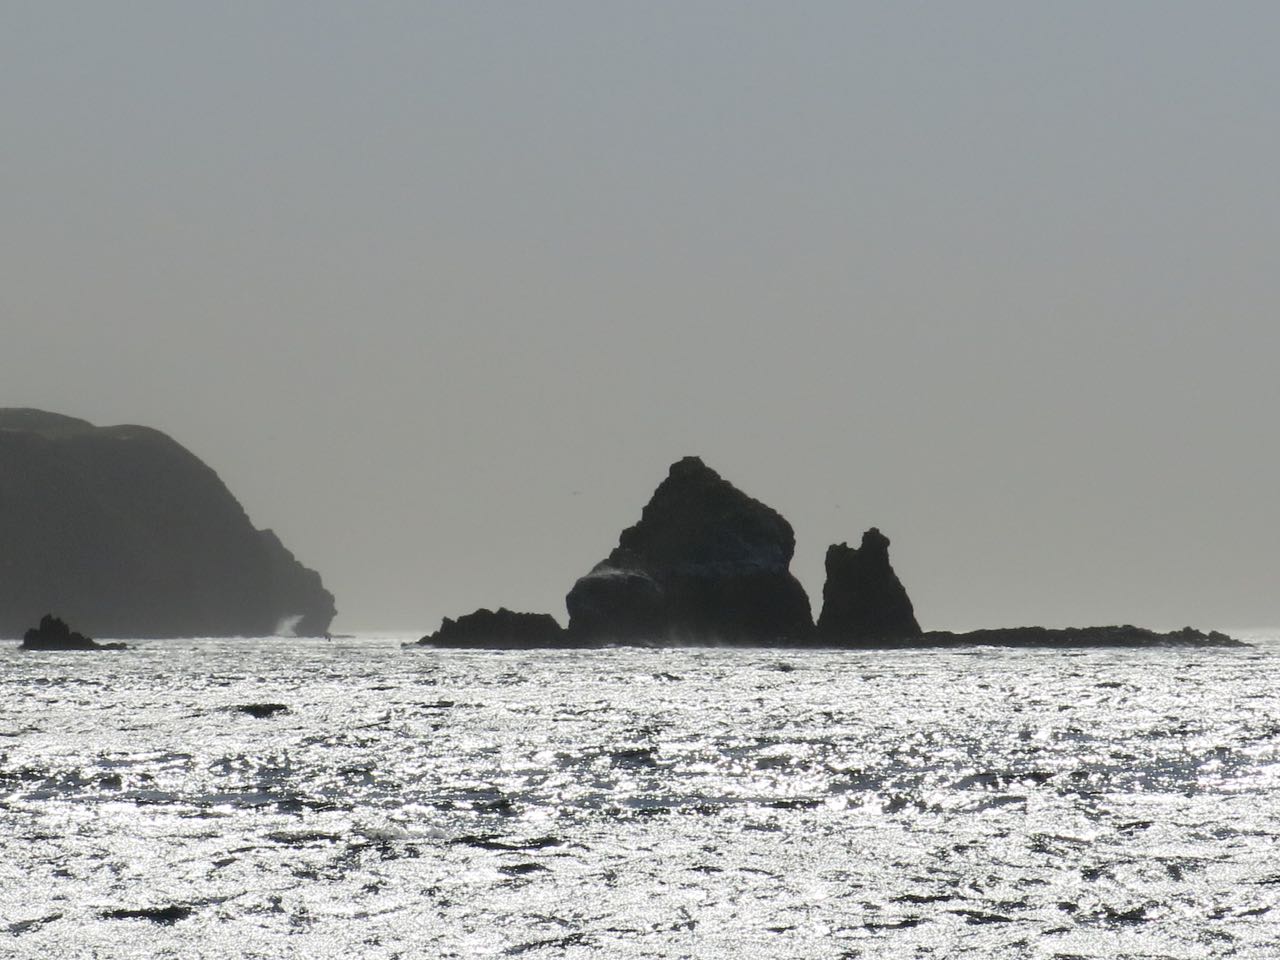 Go to Cat Rock on Anacapa Island with Capt. Dan Ryder and Sai Channel Islands